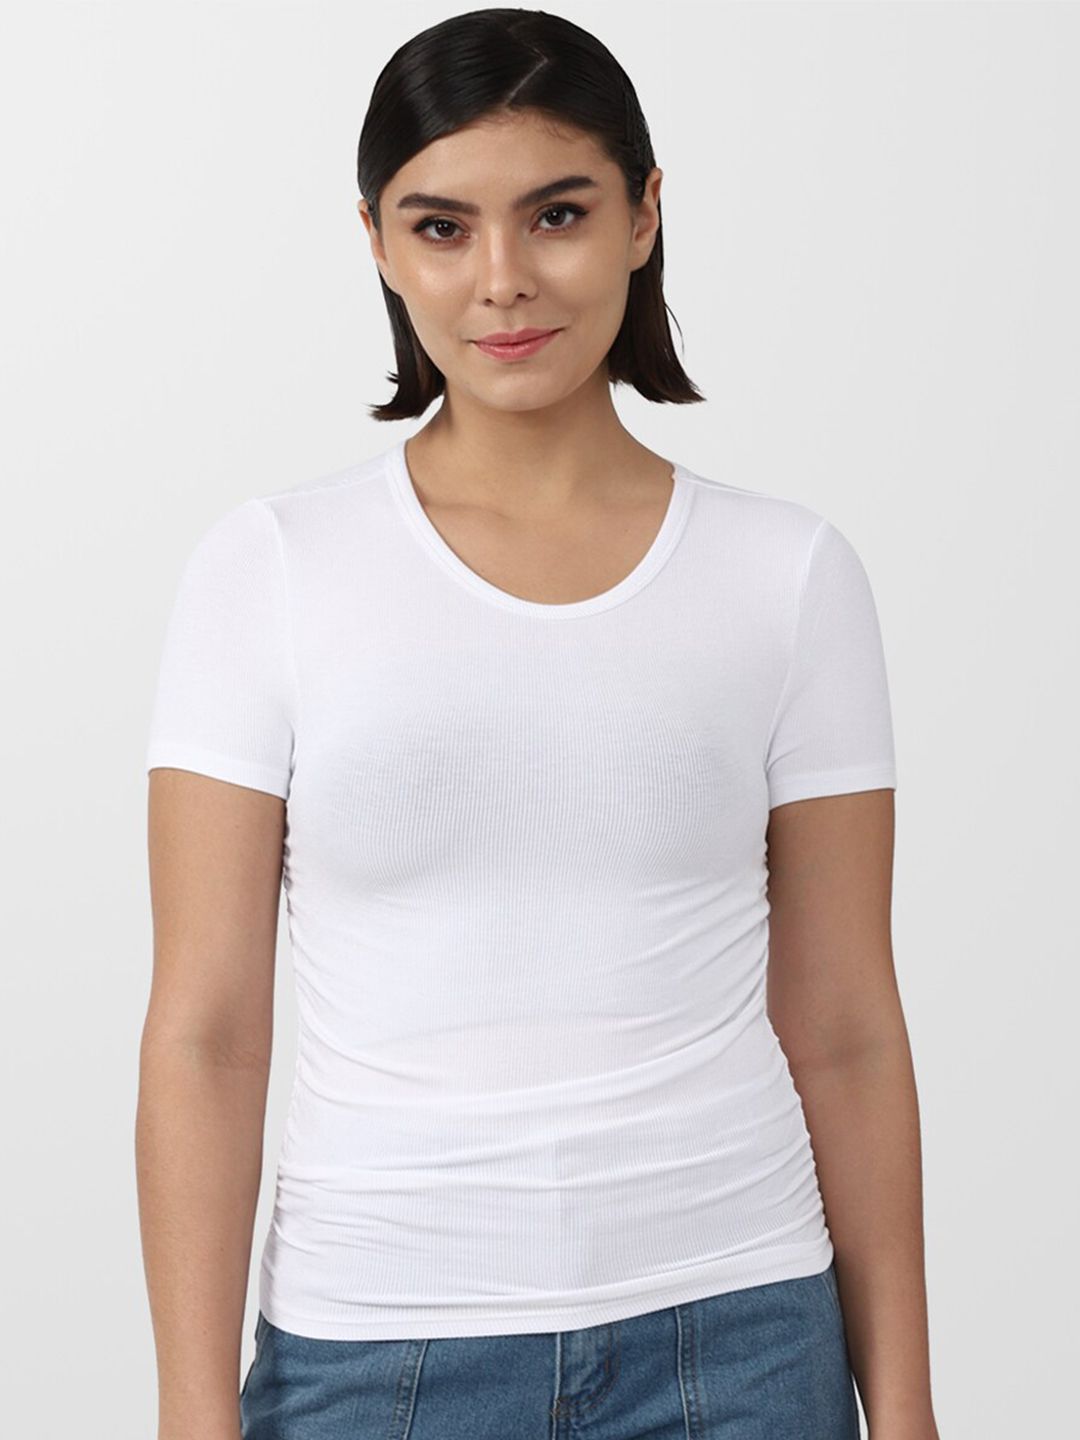 FOREVER 21 Women White Solid Top Price in India